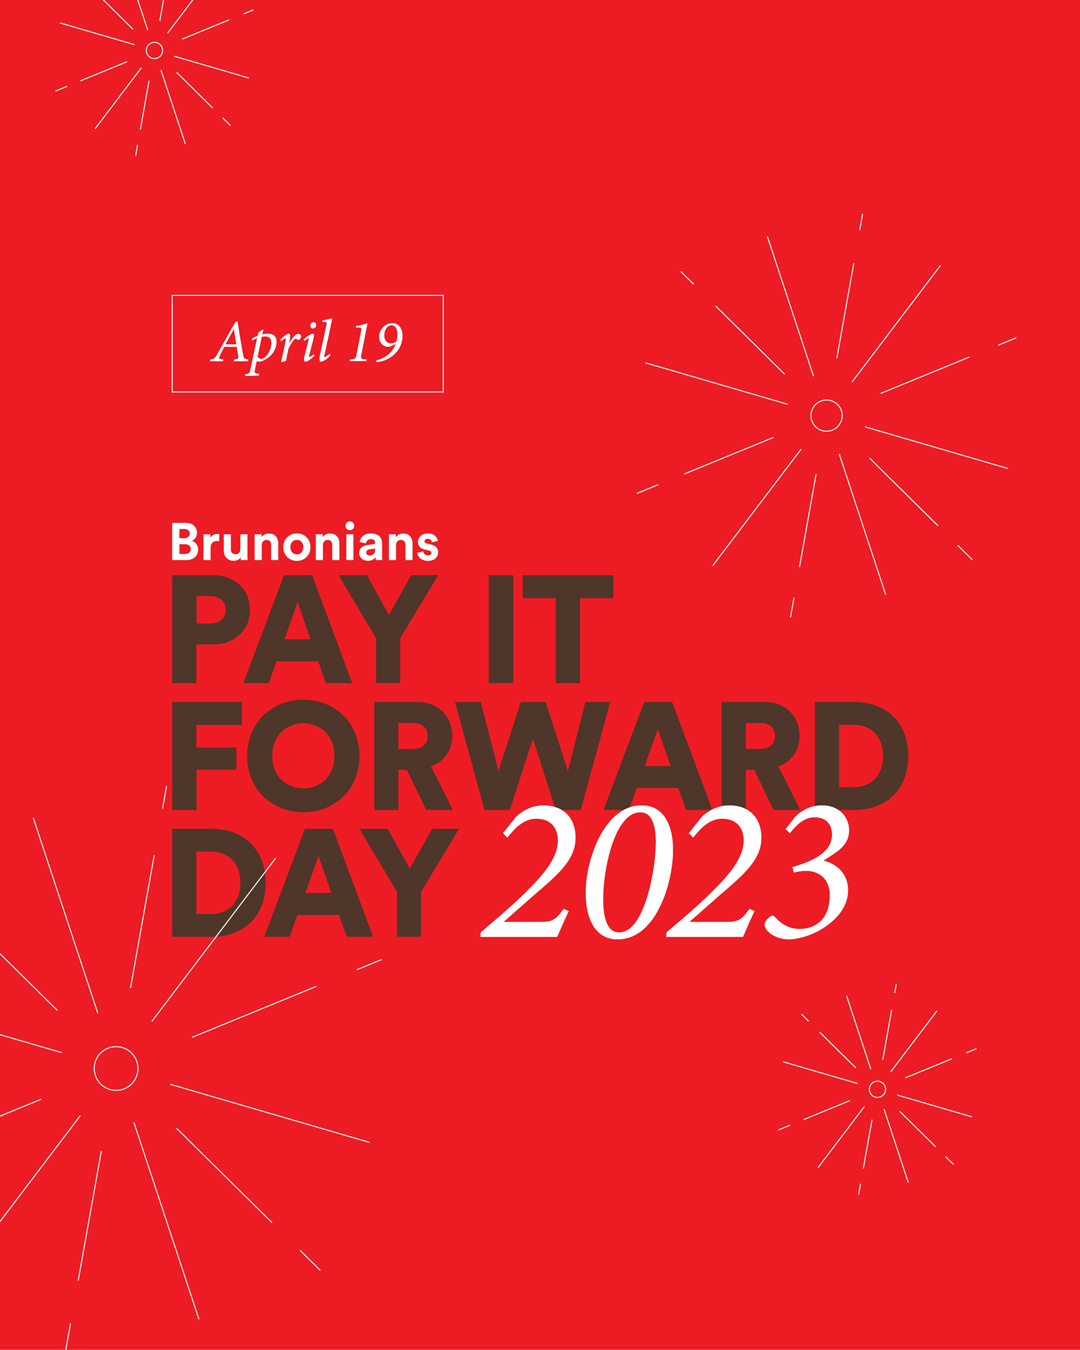 Brunonians Pay It Forward Day graphic for social with red background and white fireworks